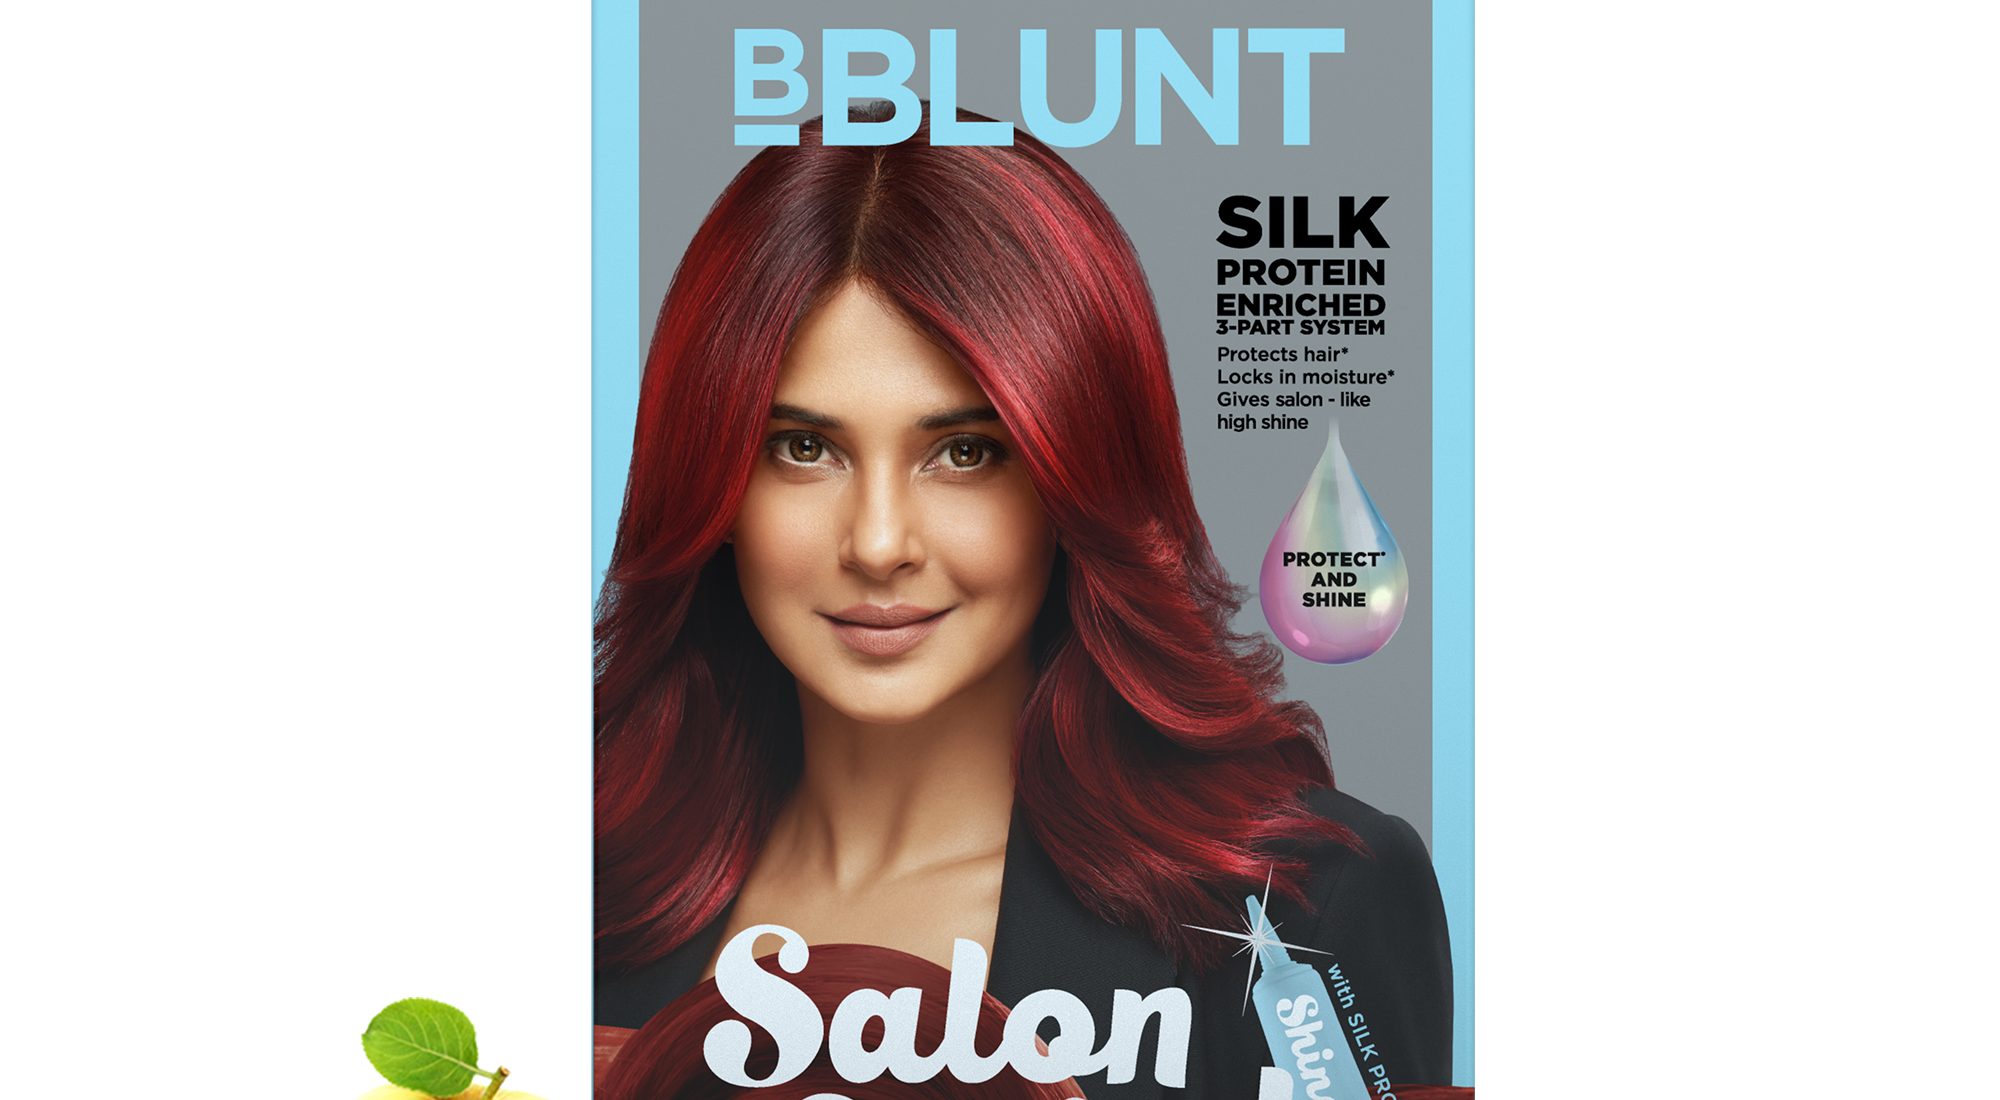 Jennifer Winget to be the face of BBLUNT’s all-new, bold, fashion shade, Cherry Red!